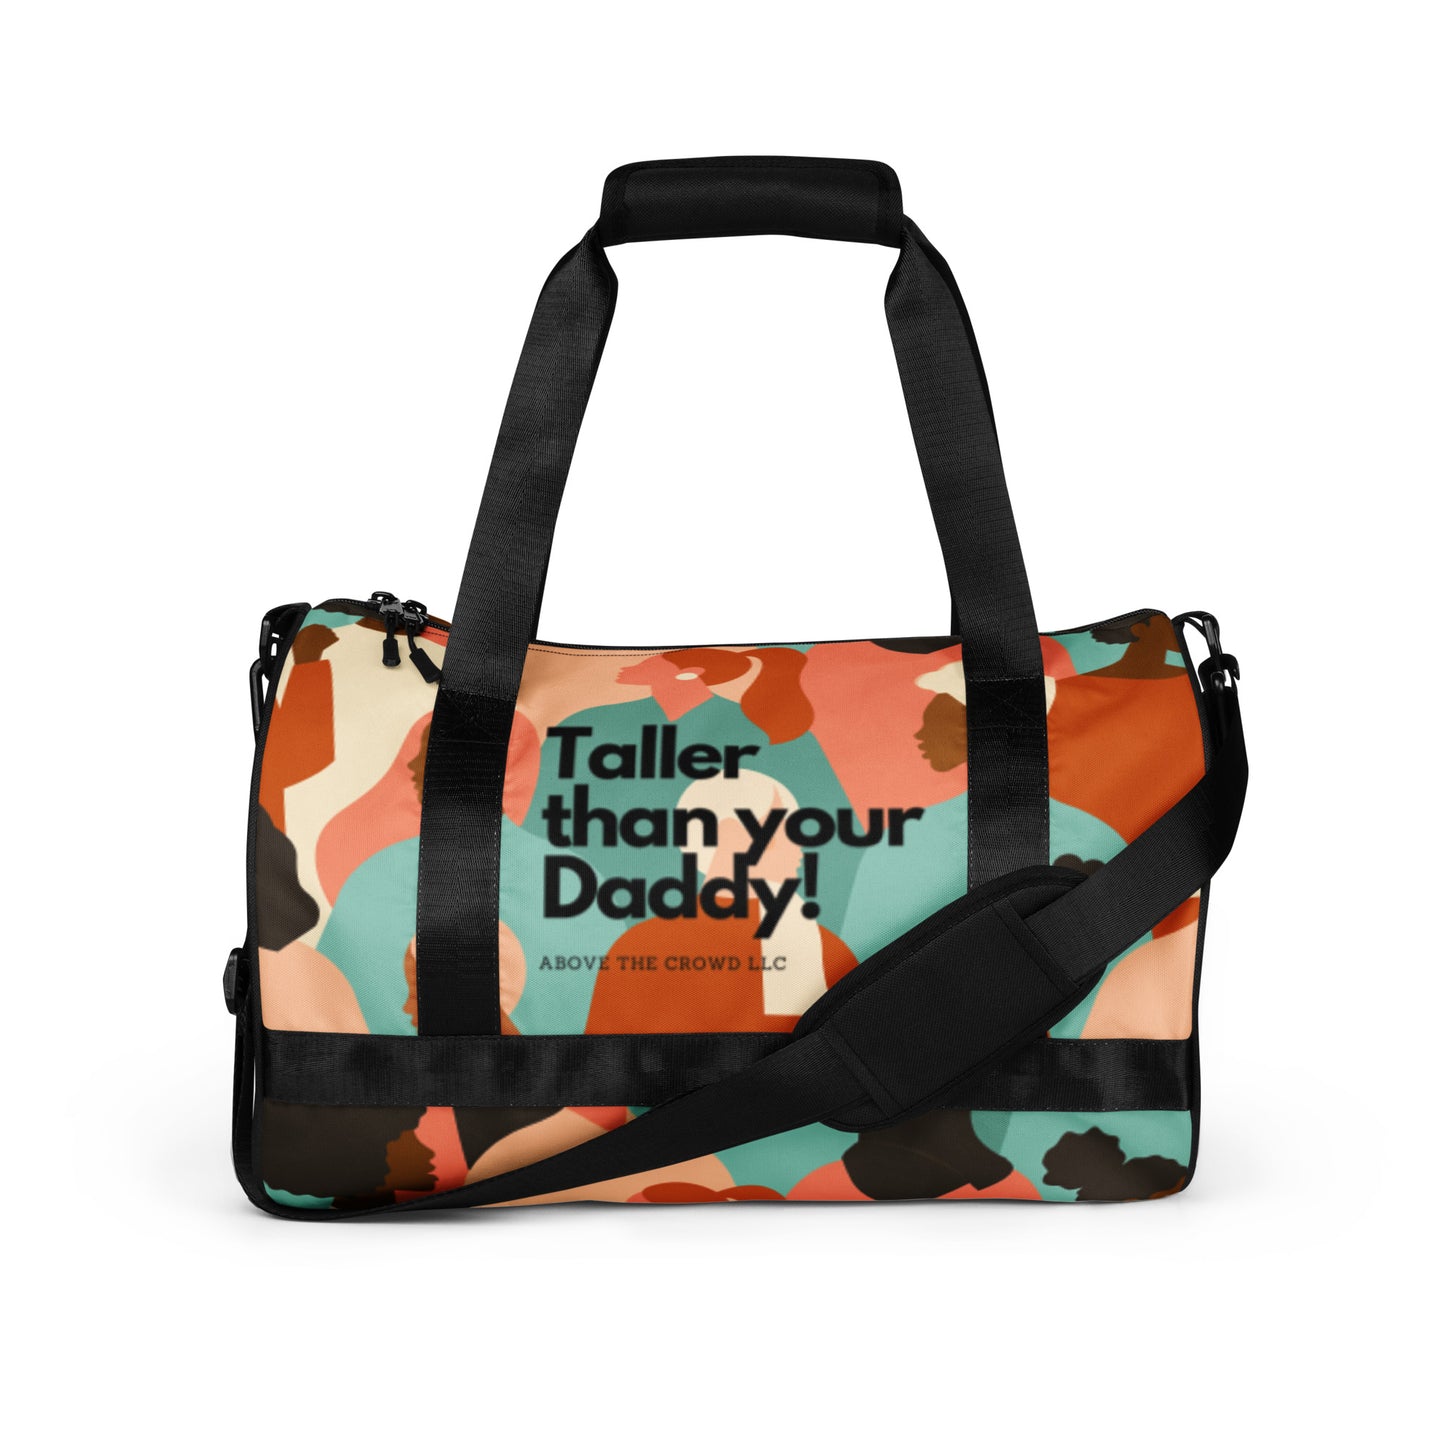 Limited Edition Women's History 'Taller than your Daddy' Gym Bag